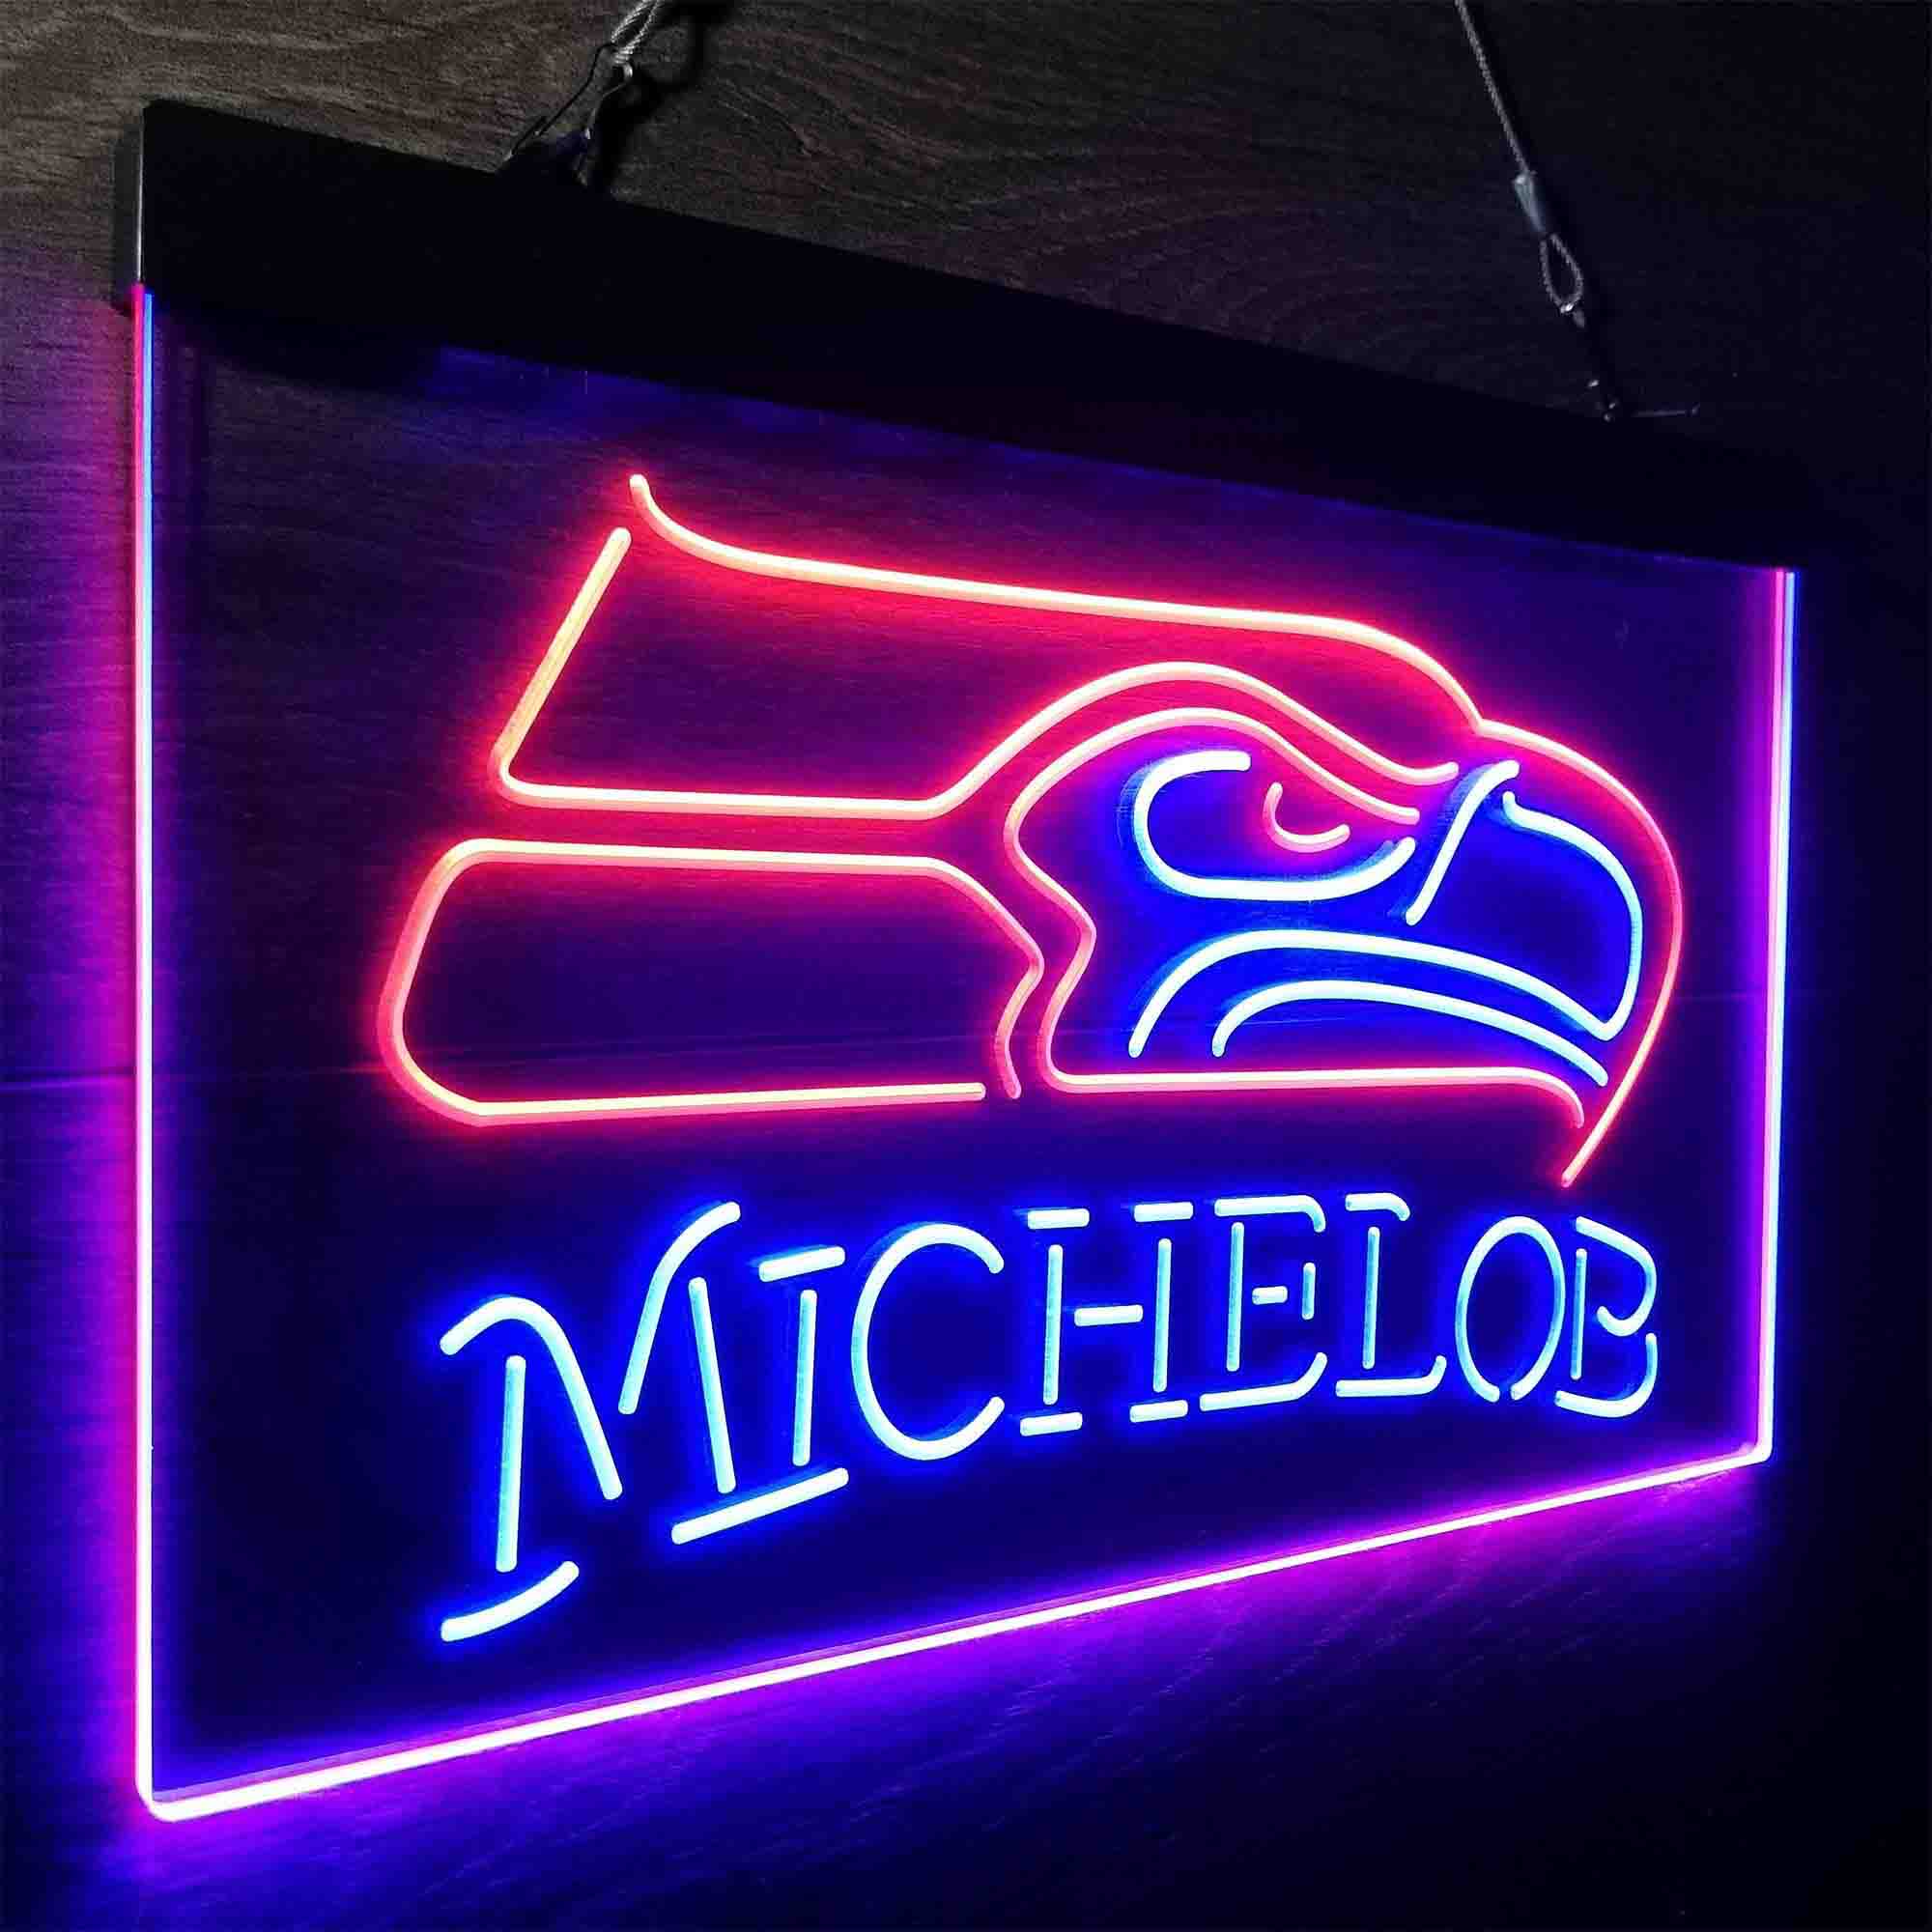 Michelob Bar Seattle Seahawks Est. 1976 LED Neon Sign